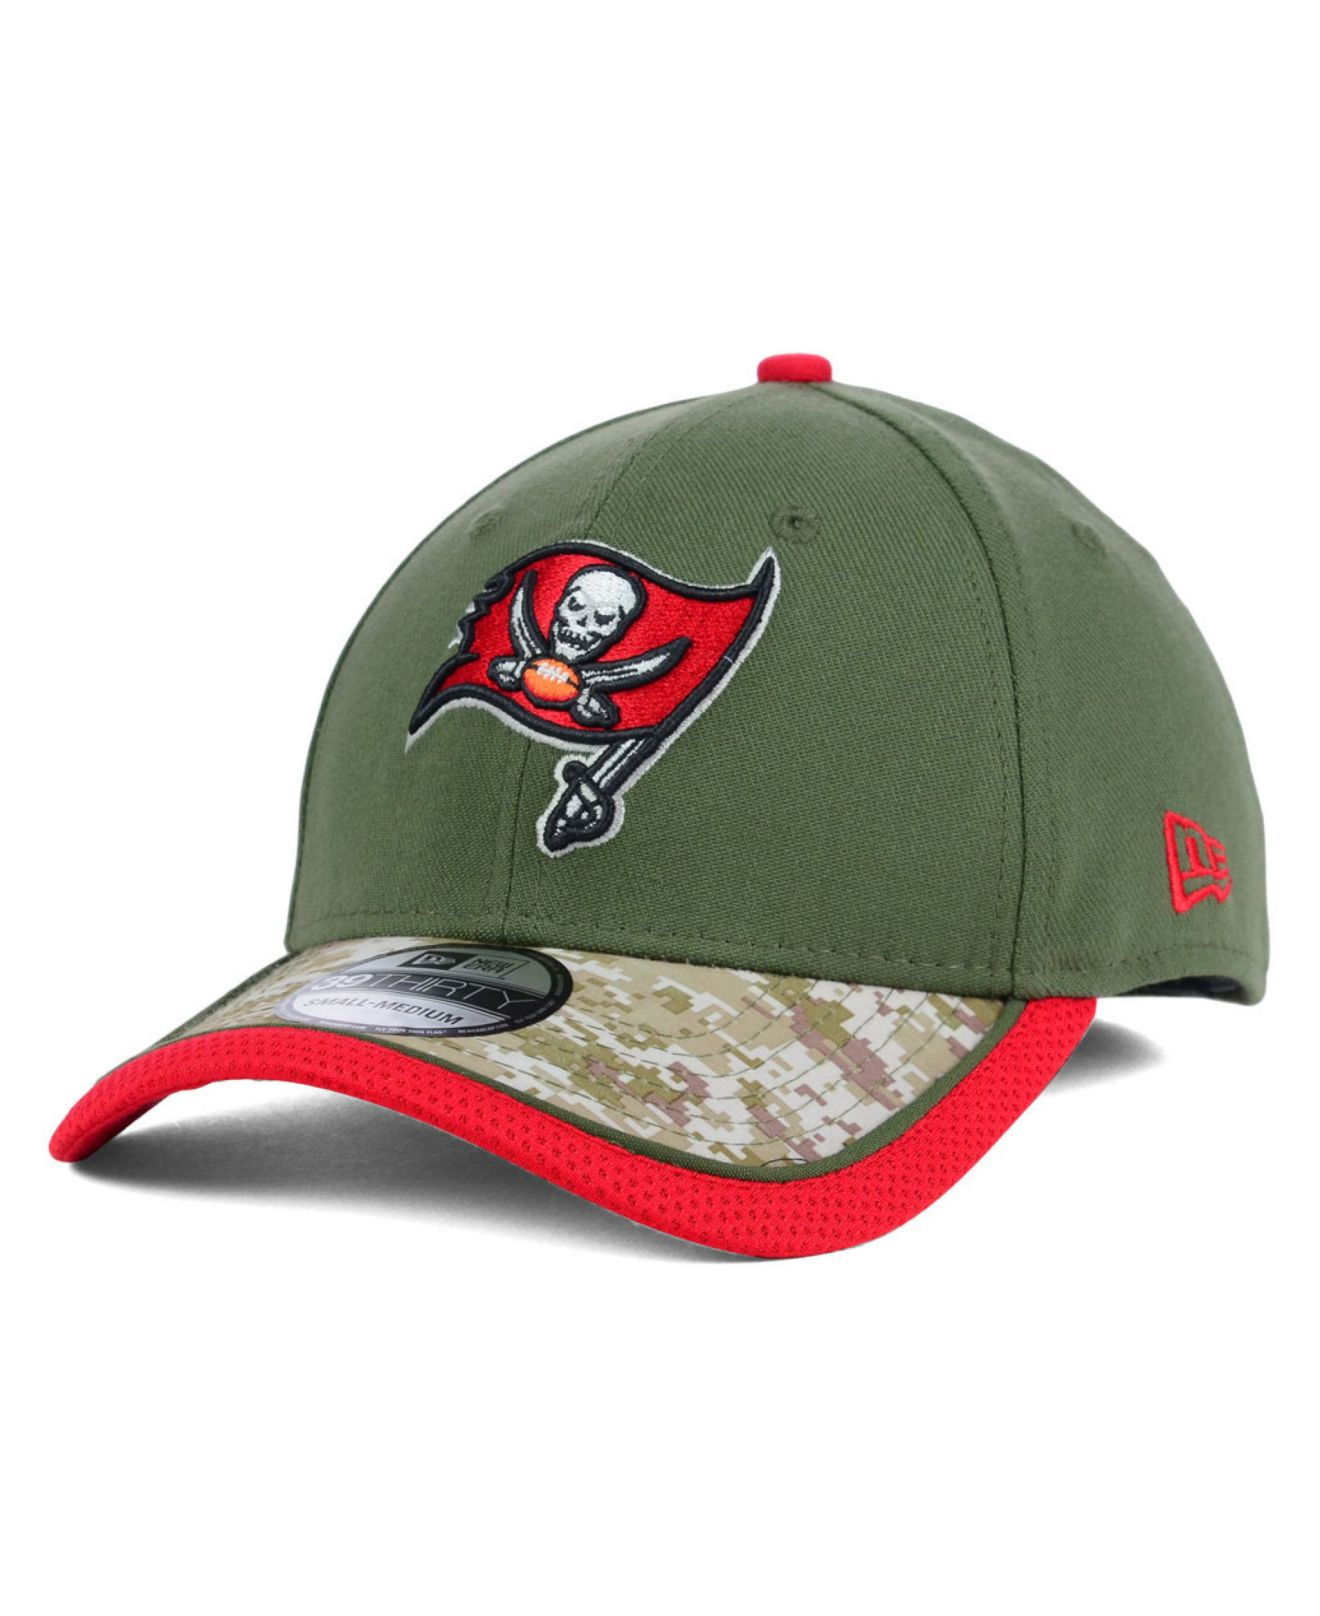 Lyst - Ktz Tampa Bay Buccaneers Salute To Service 39thirty Cap in Green ...